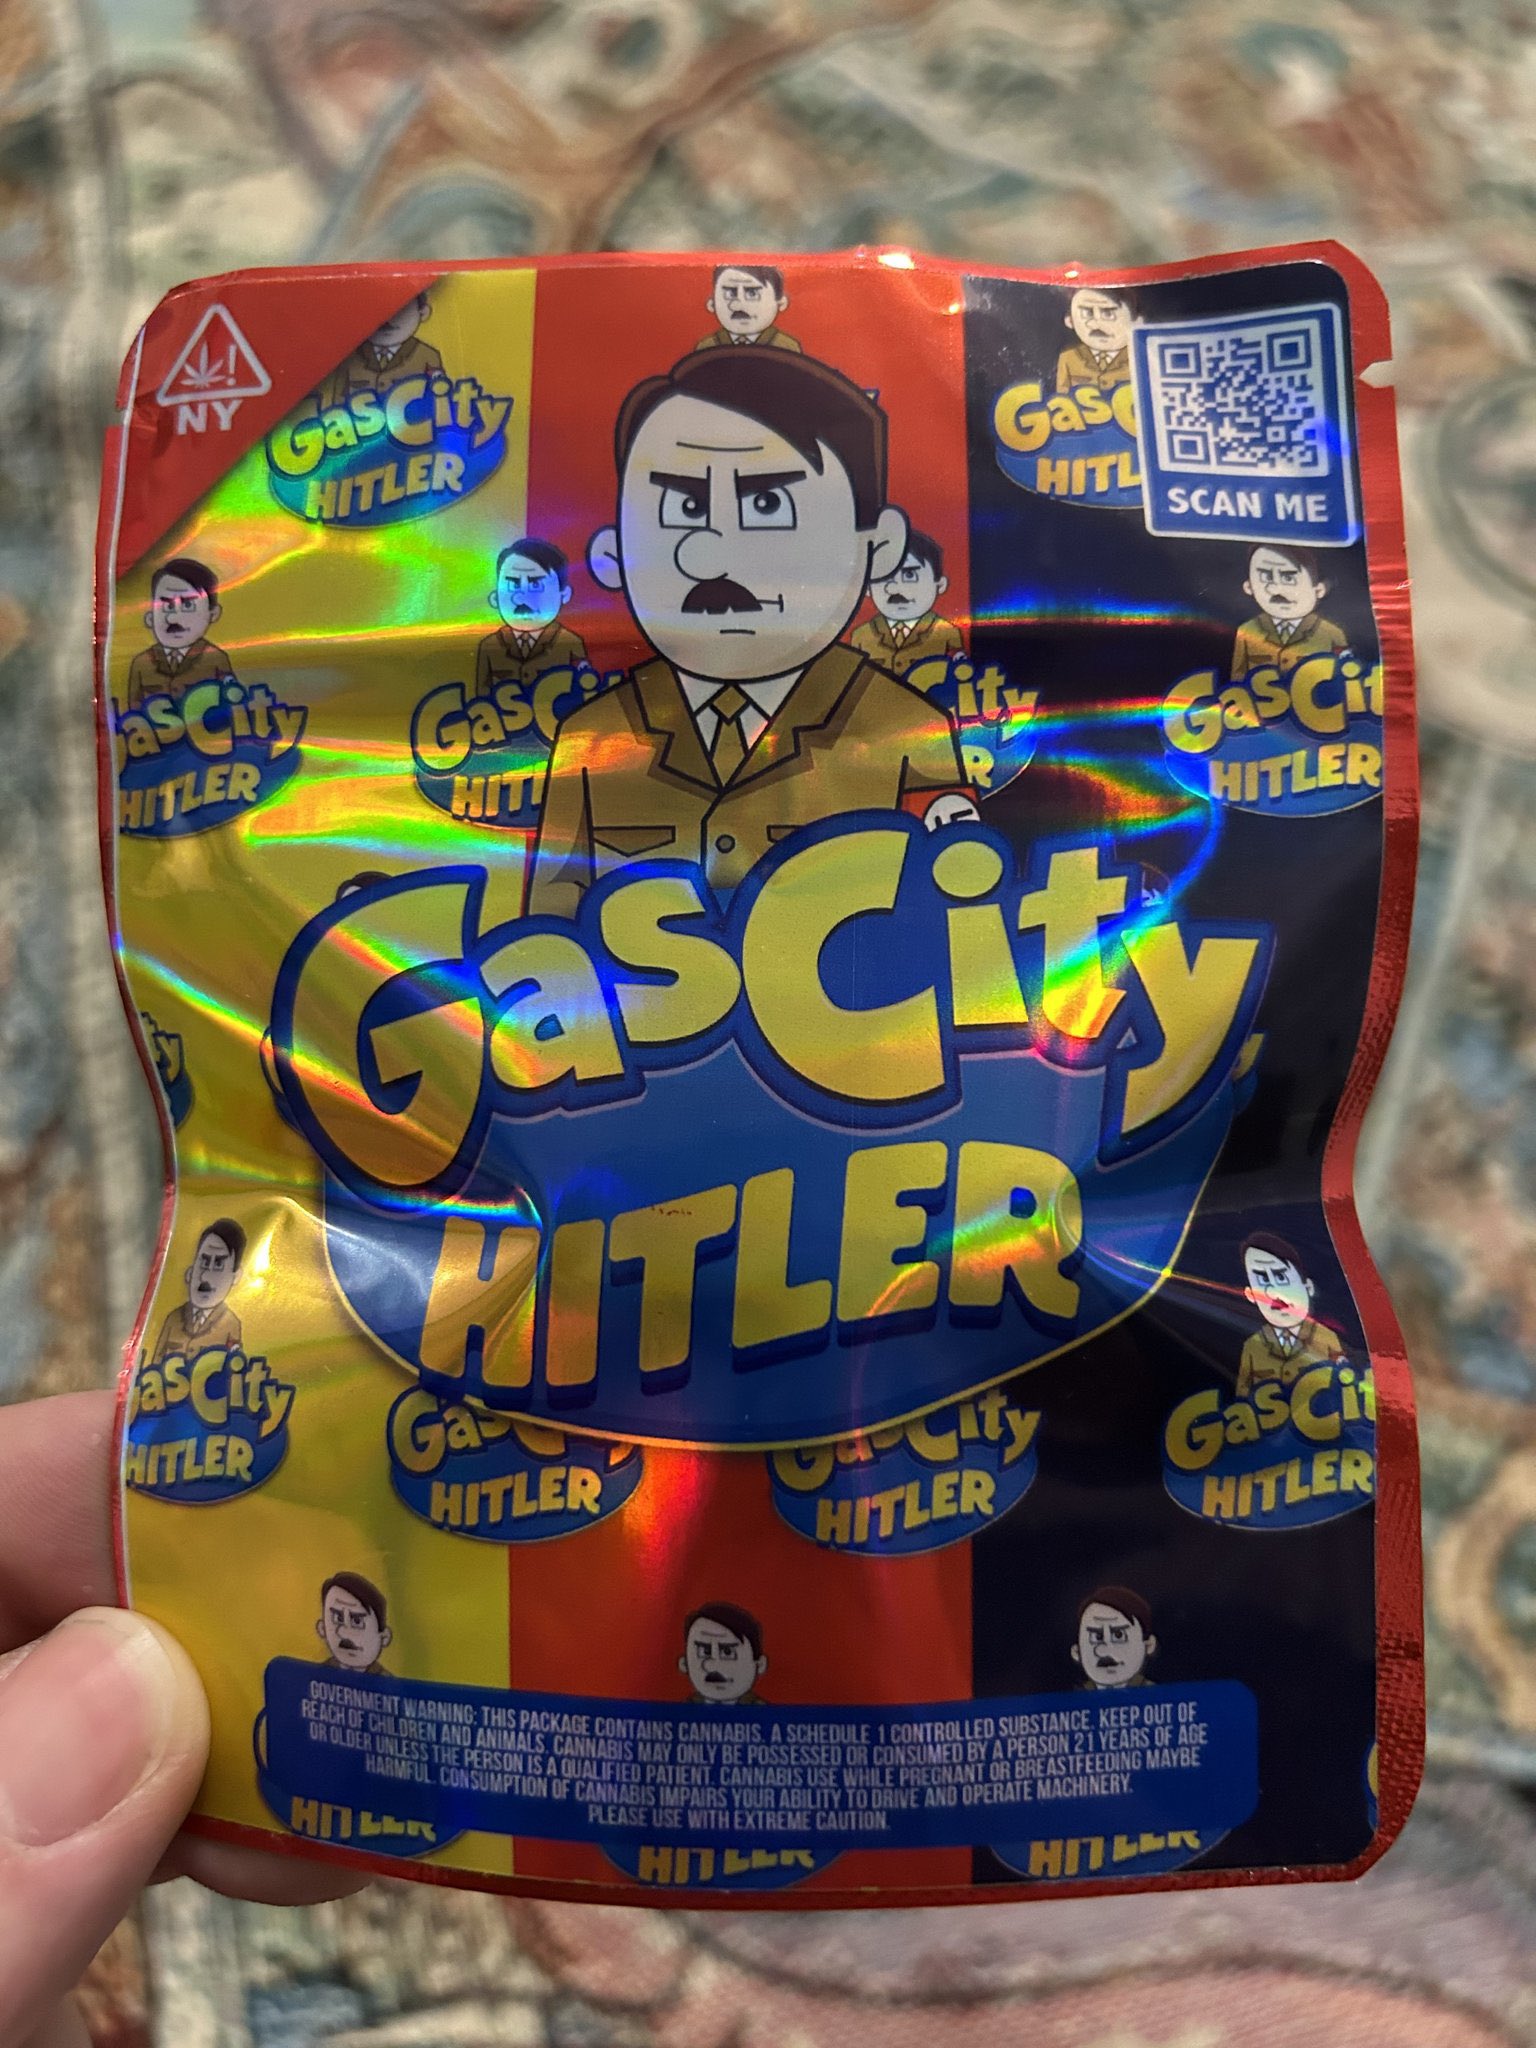 Ridiculously Offensive Weed Strain Bags - toy - Ny GasCity Hitler